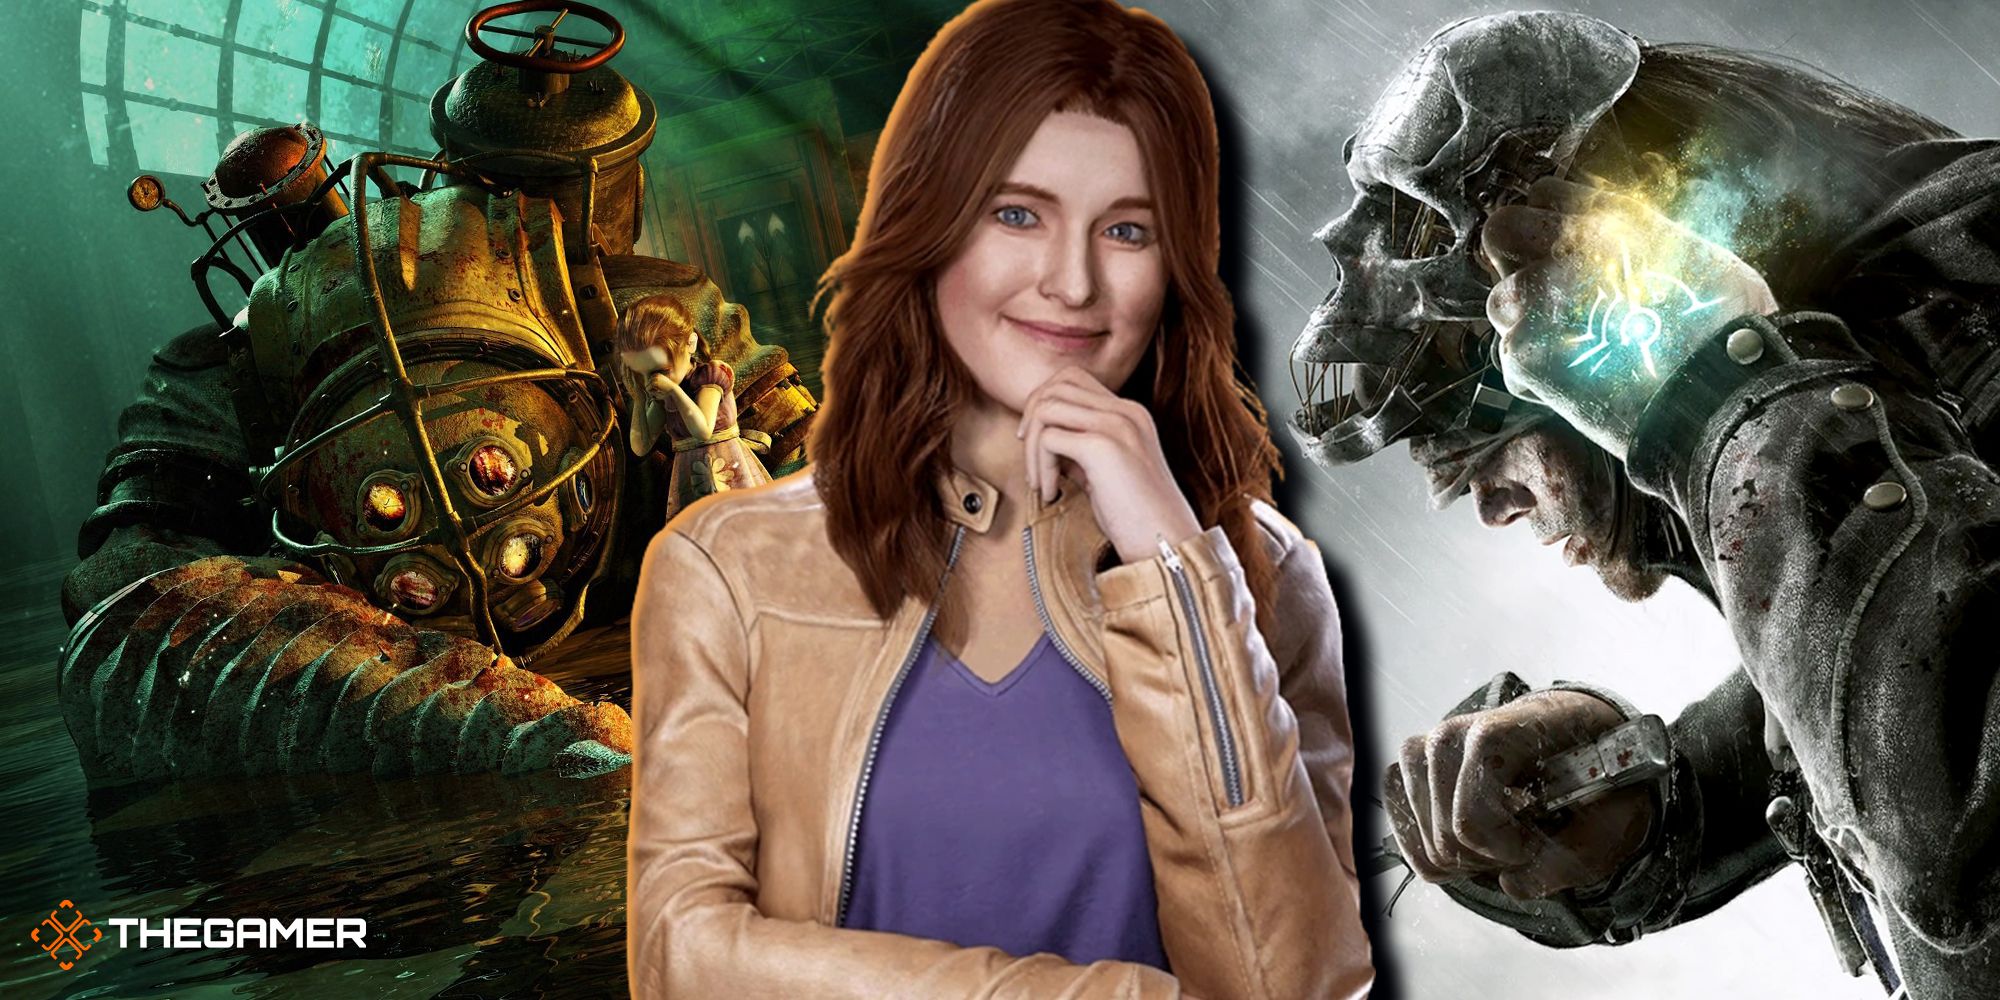 Spider-Man 2's Mary Jane Watson smiling at the camera, with a Big Daddy from BioShock on the left, and Corvo from Dishonored on the right